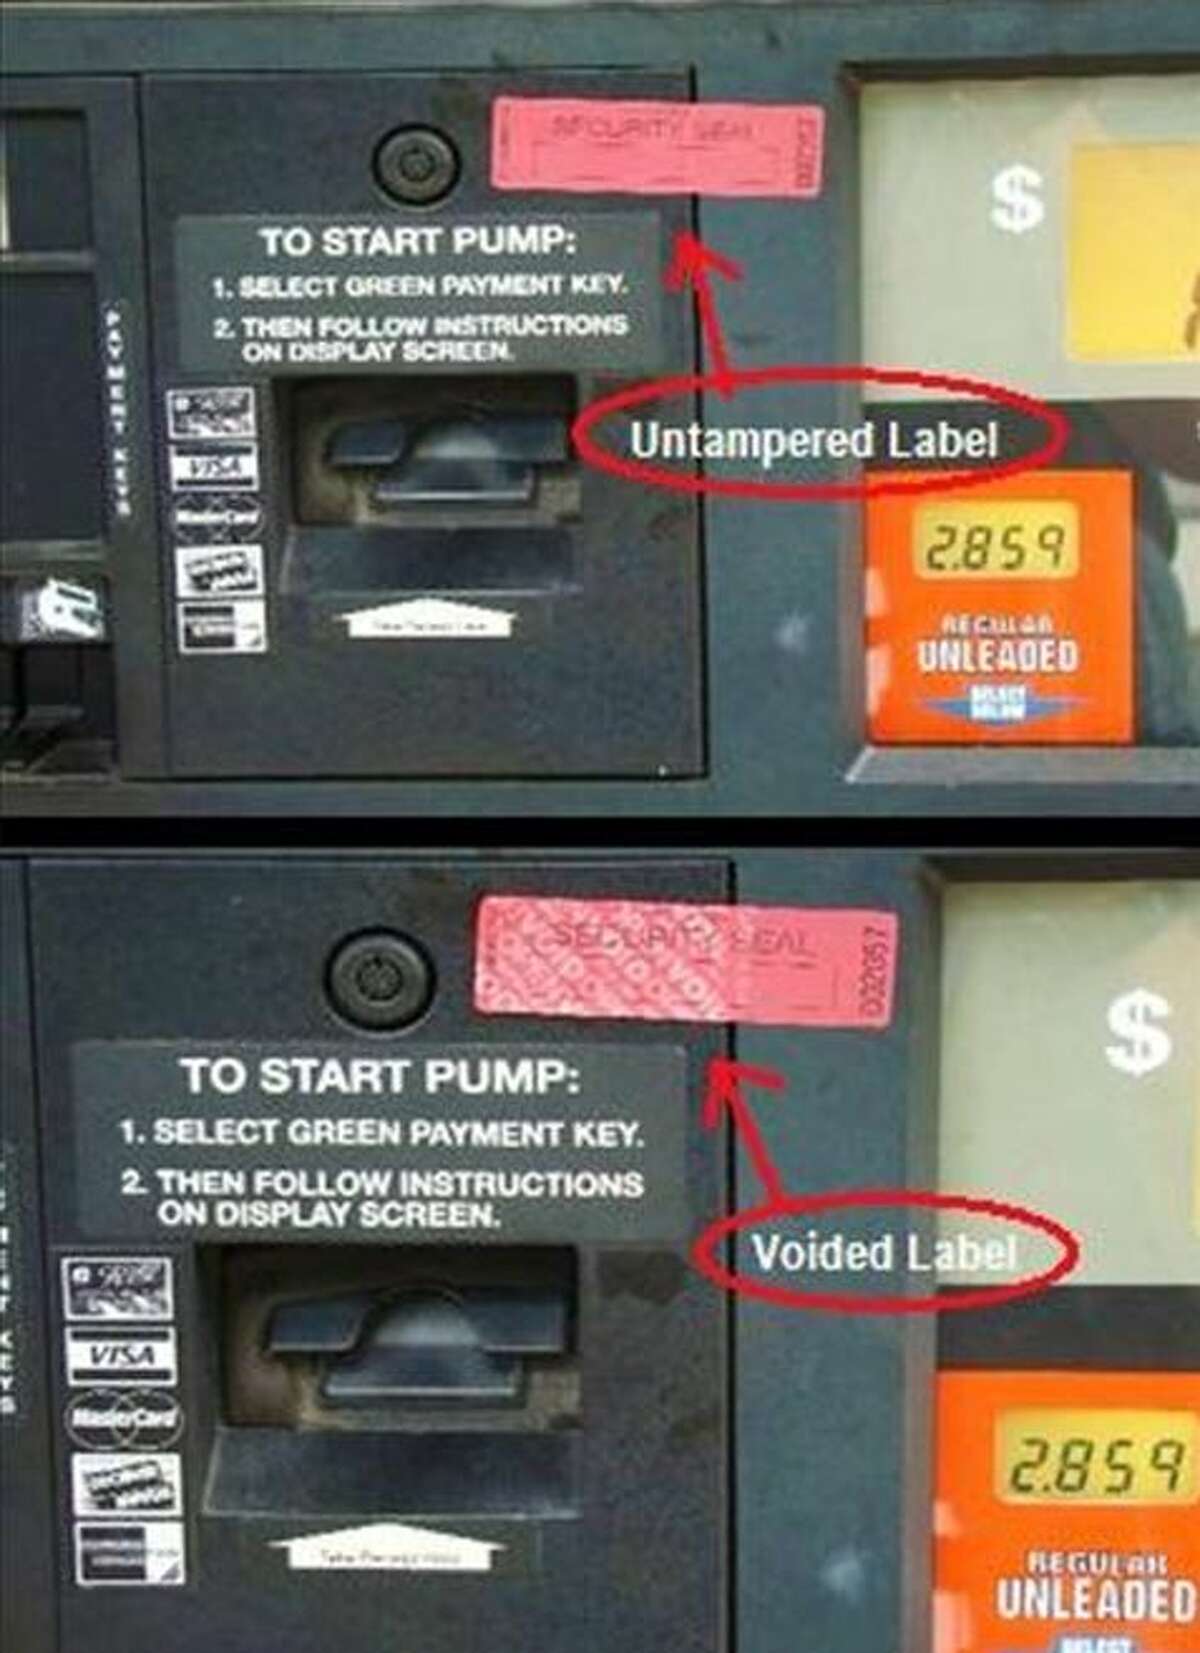 After a discovery in Cotulla last week revealed that thieves had installed a credit card skimmer in a gas pump at a local convenience store, La Salle County Sheriff’s Office investigators are reminding motorists to always check for evidence of machine tampering before paying for fuel outdoors.